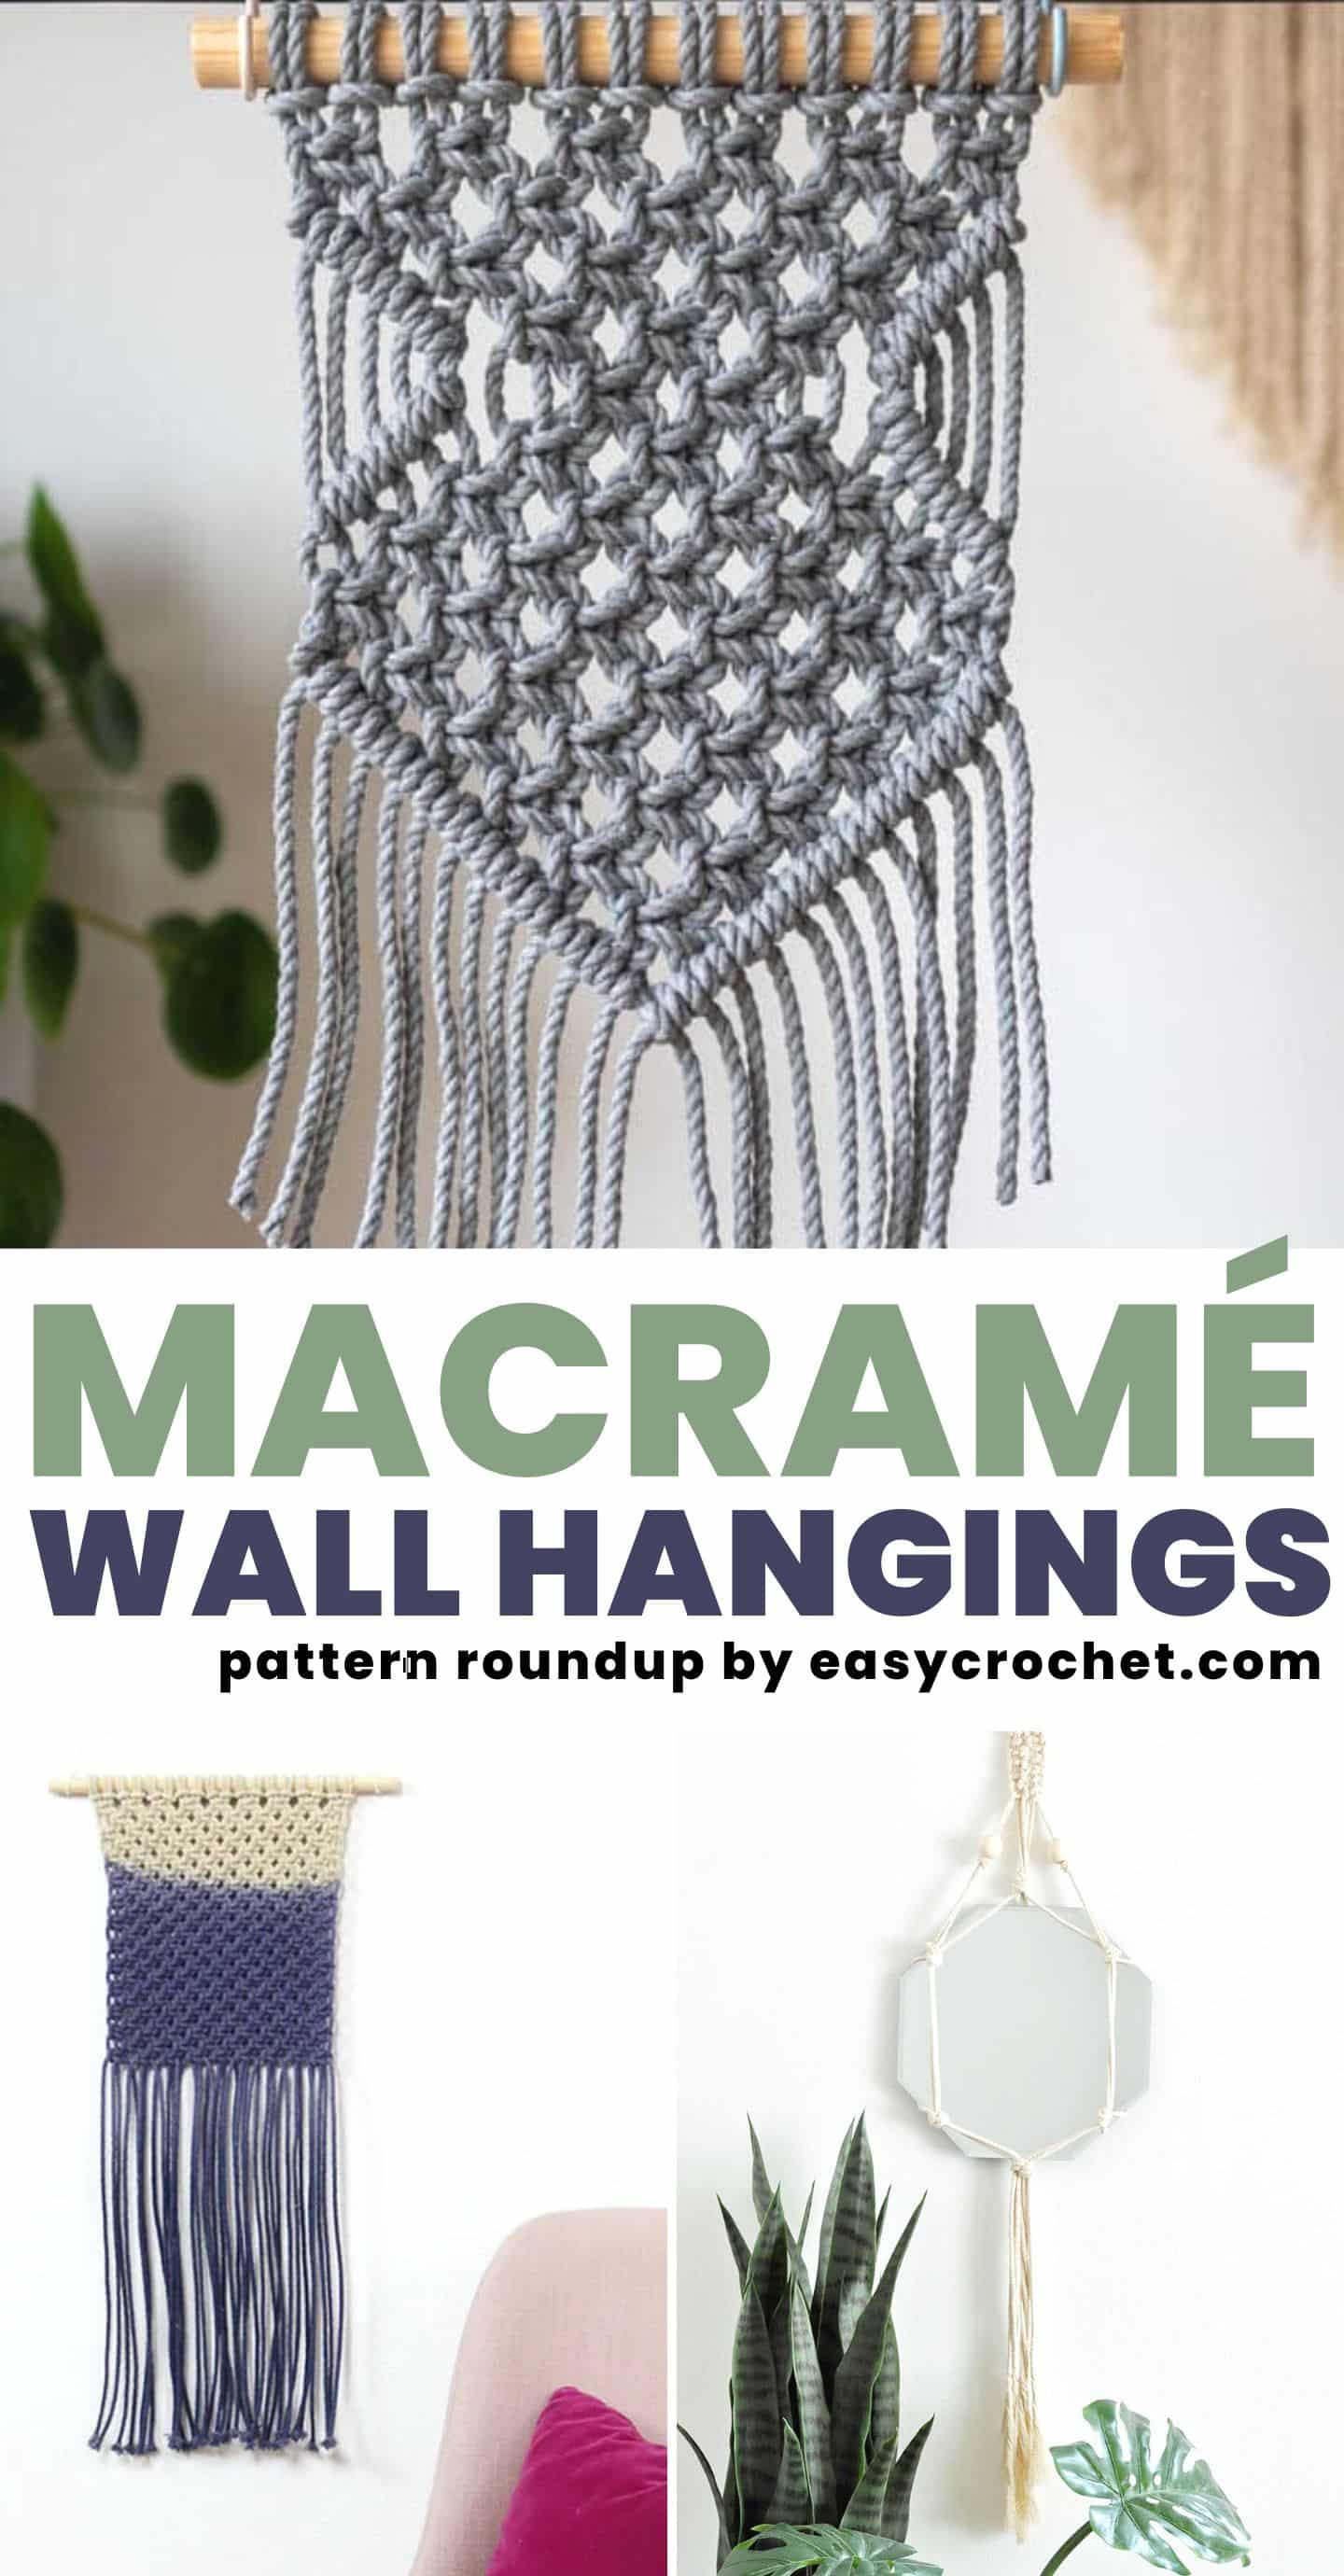 Basic Macrame Instructions: Making Your Own Knotted Art with the